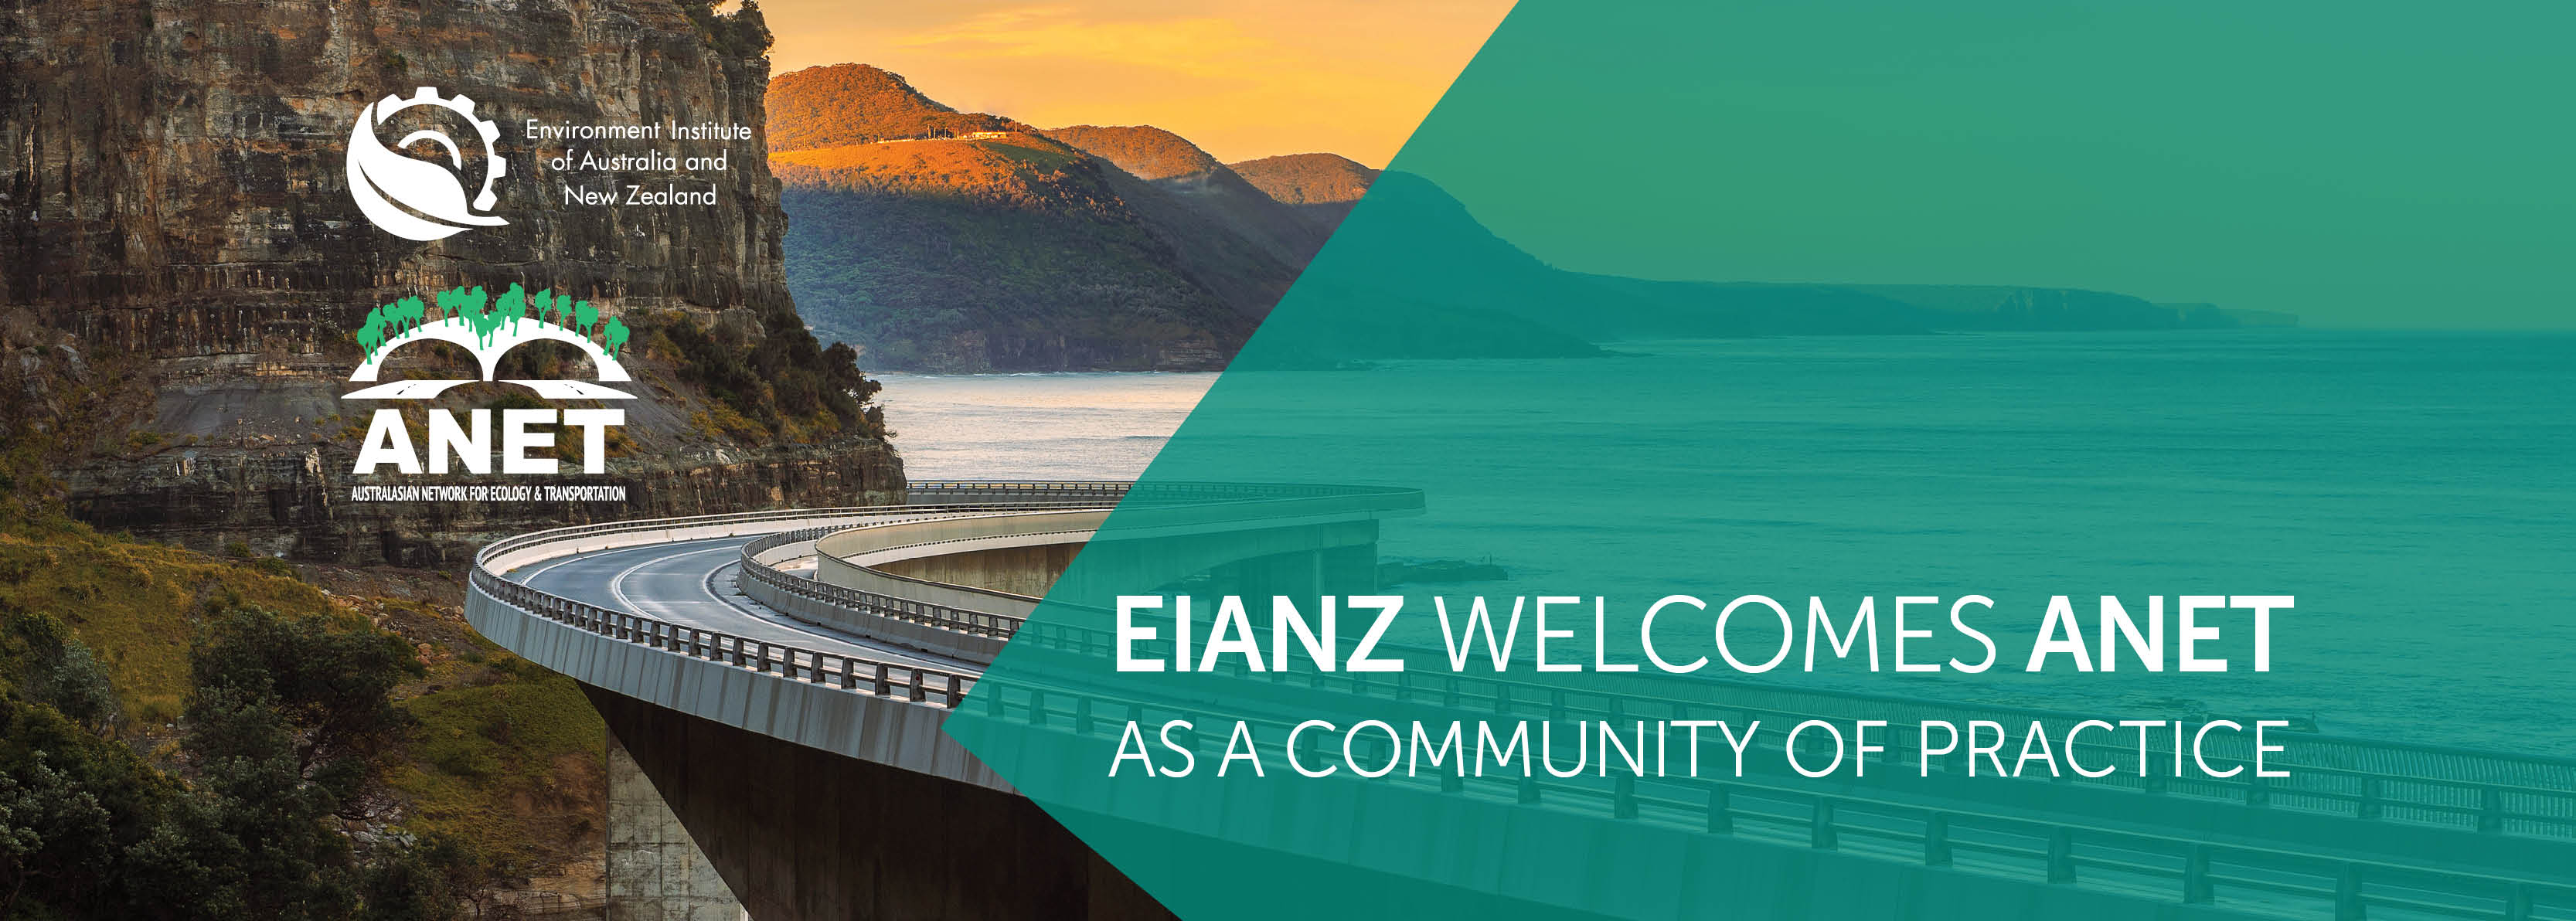 EIANZ welcomes ANET as a Community of Practice